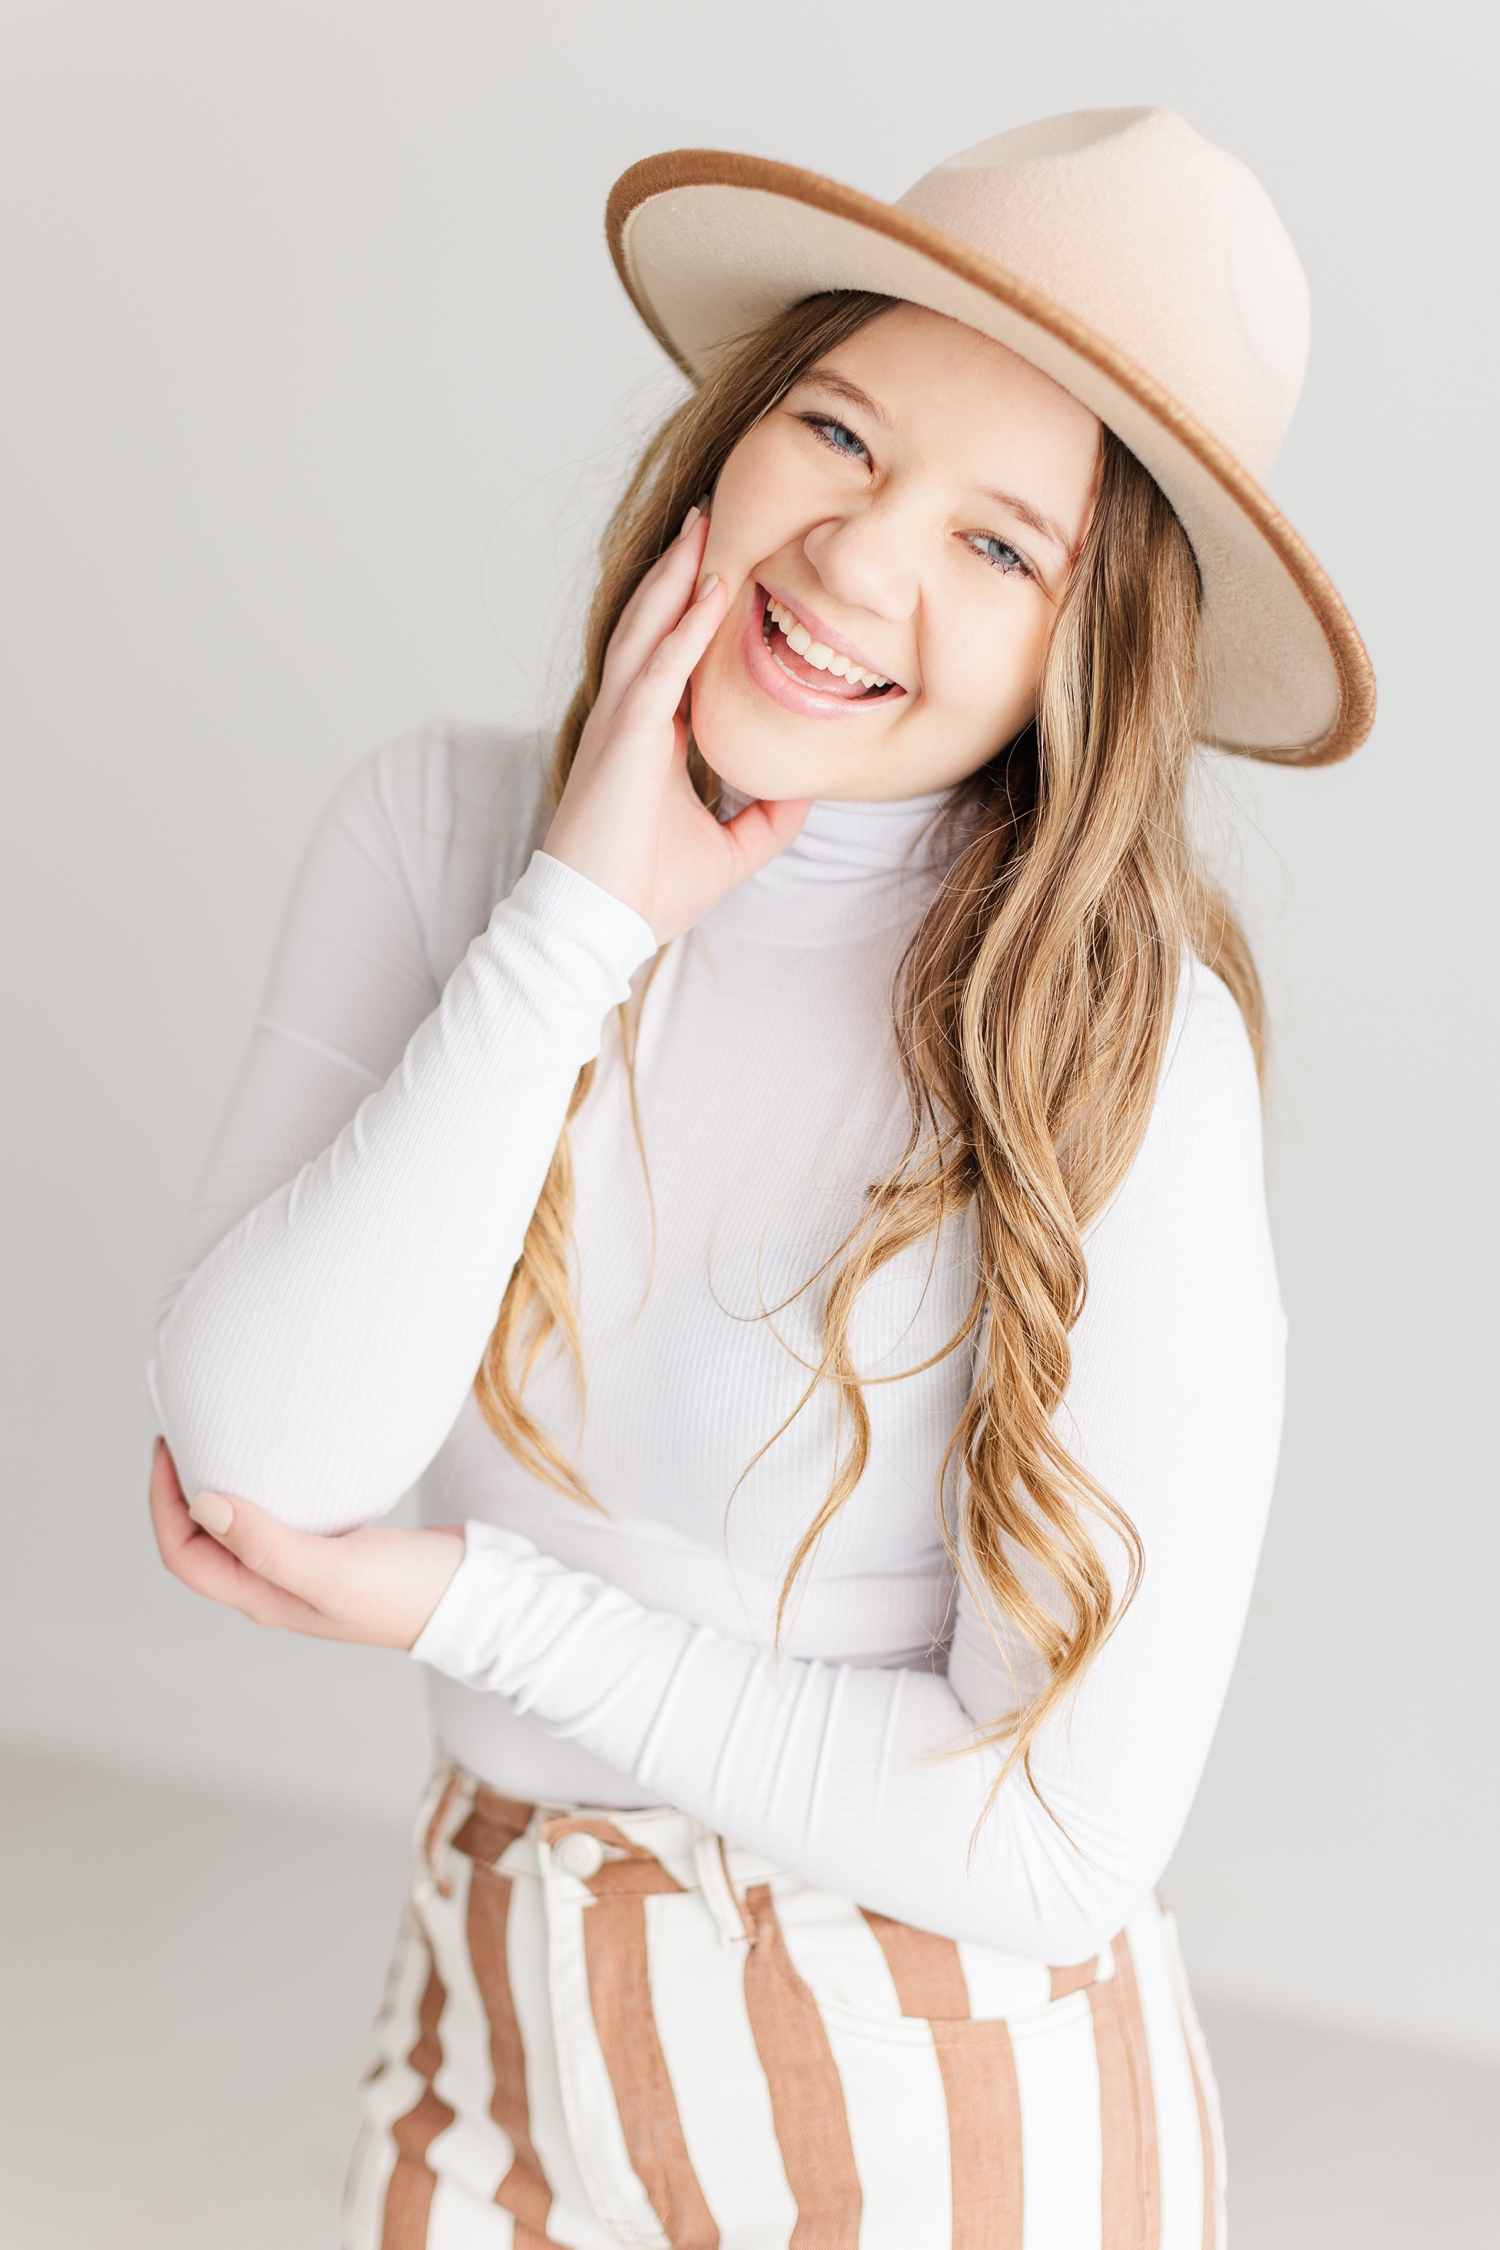 Sierra laughs as she tilts her head, wearing white and camel striped bell bottoms with a white turtleneck bodysuit and a camel colored, wide brim hat from West Vendee | CB Studio